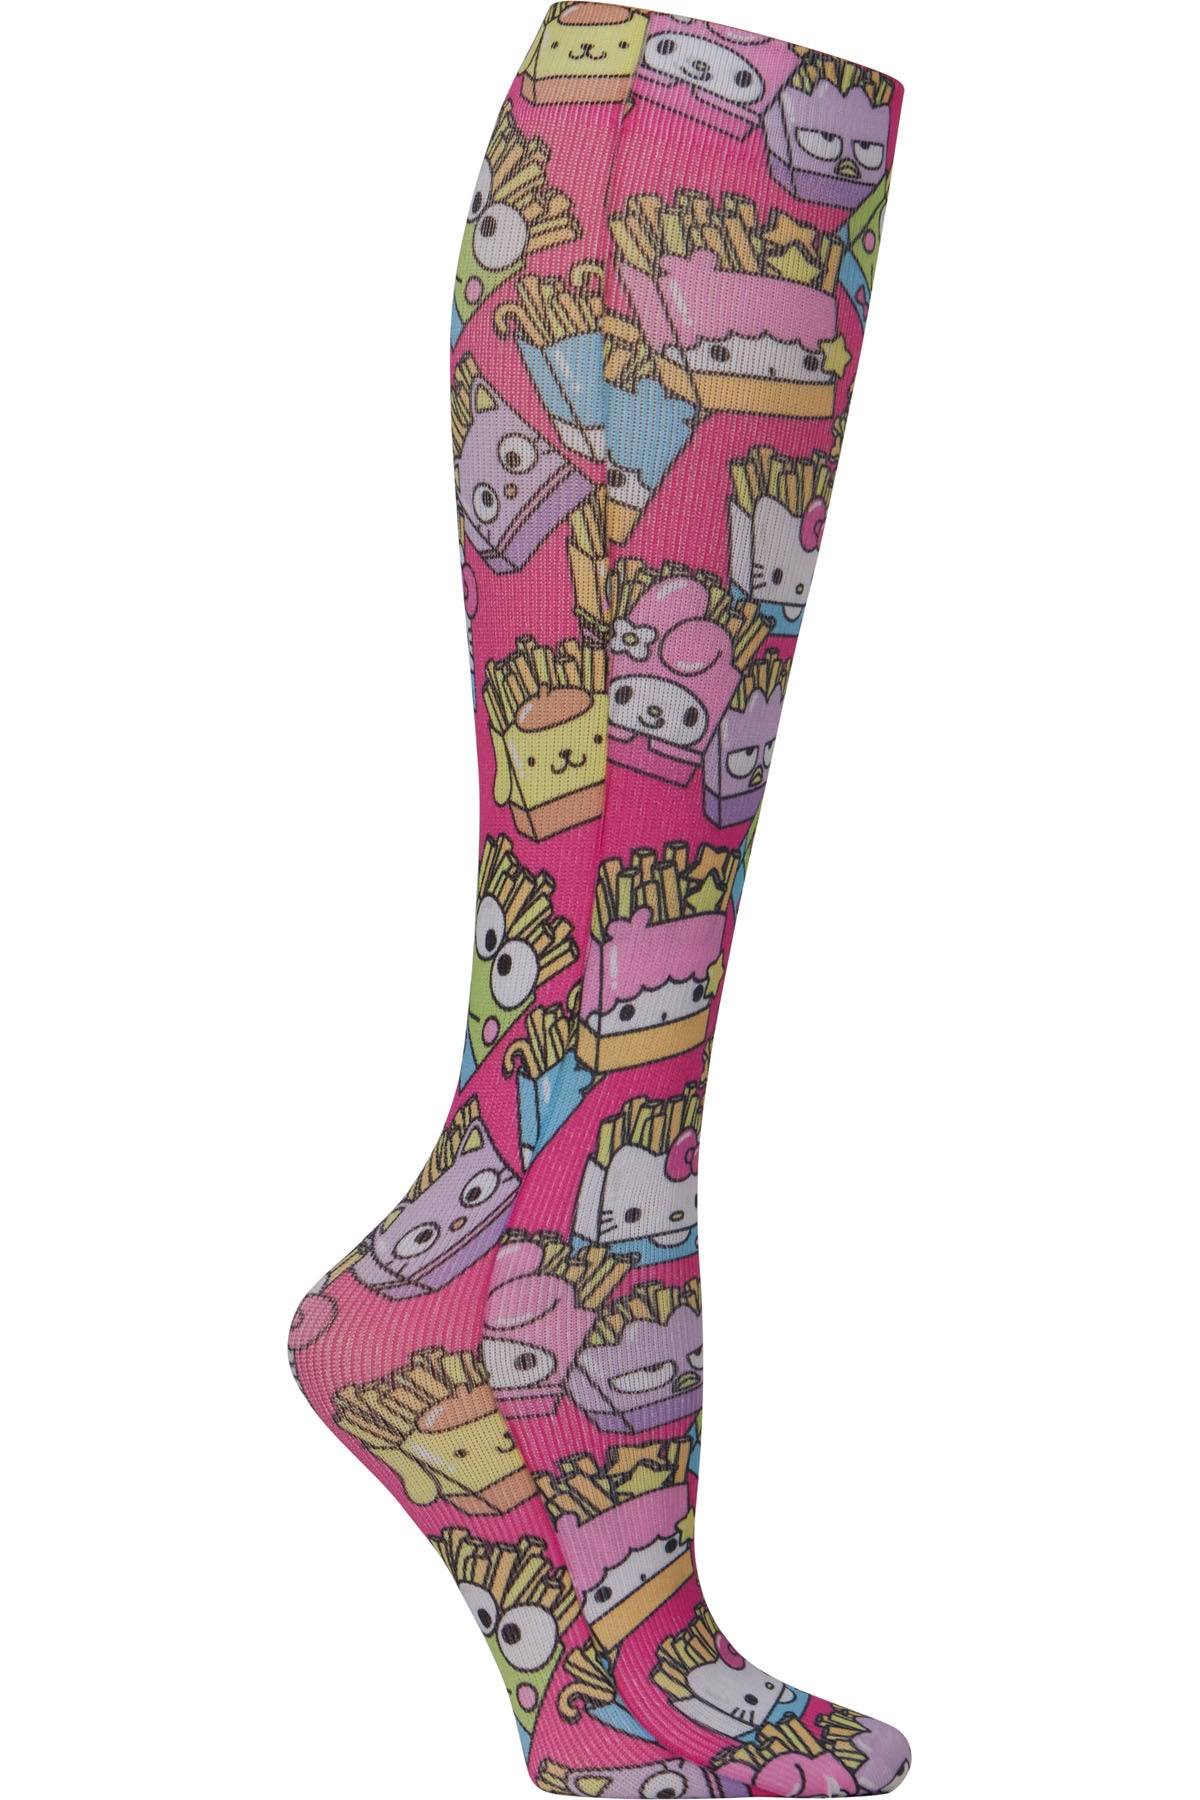 Cherokee Mild Compression Socks Comfort Support 8-15 mmHg in Friendship  Fries Pattern at Parker's Clothing and Shoes.